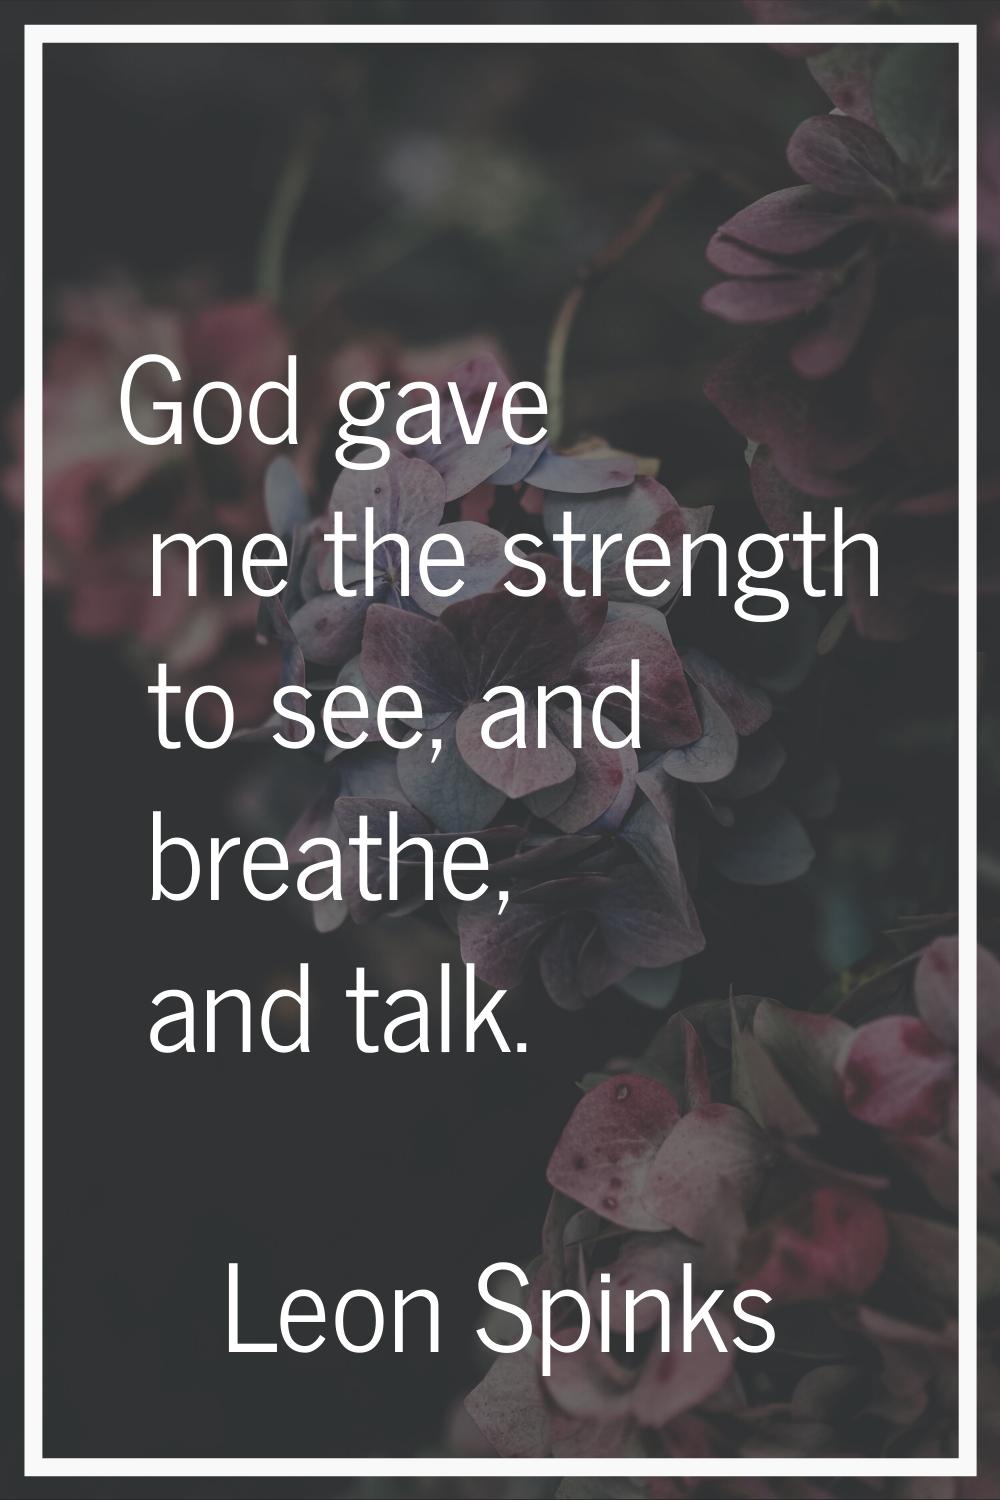 God gave me the strength to see, and breathe, and talk.